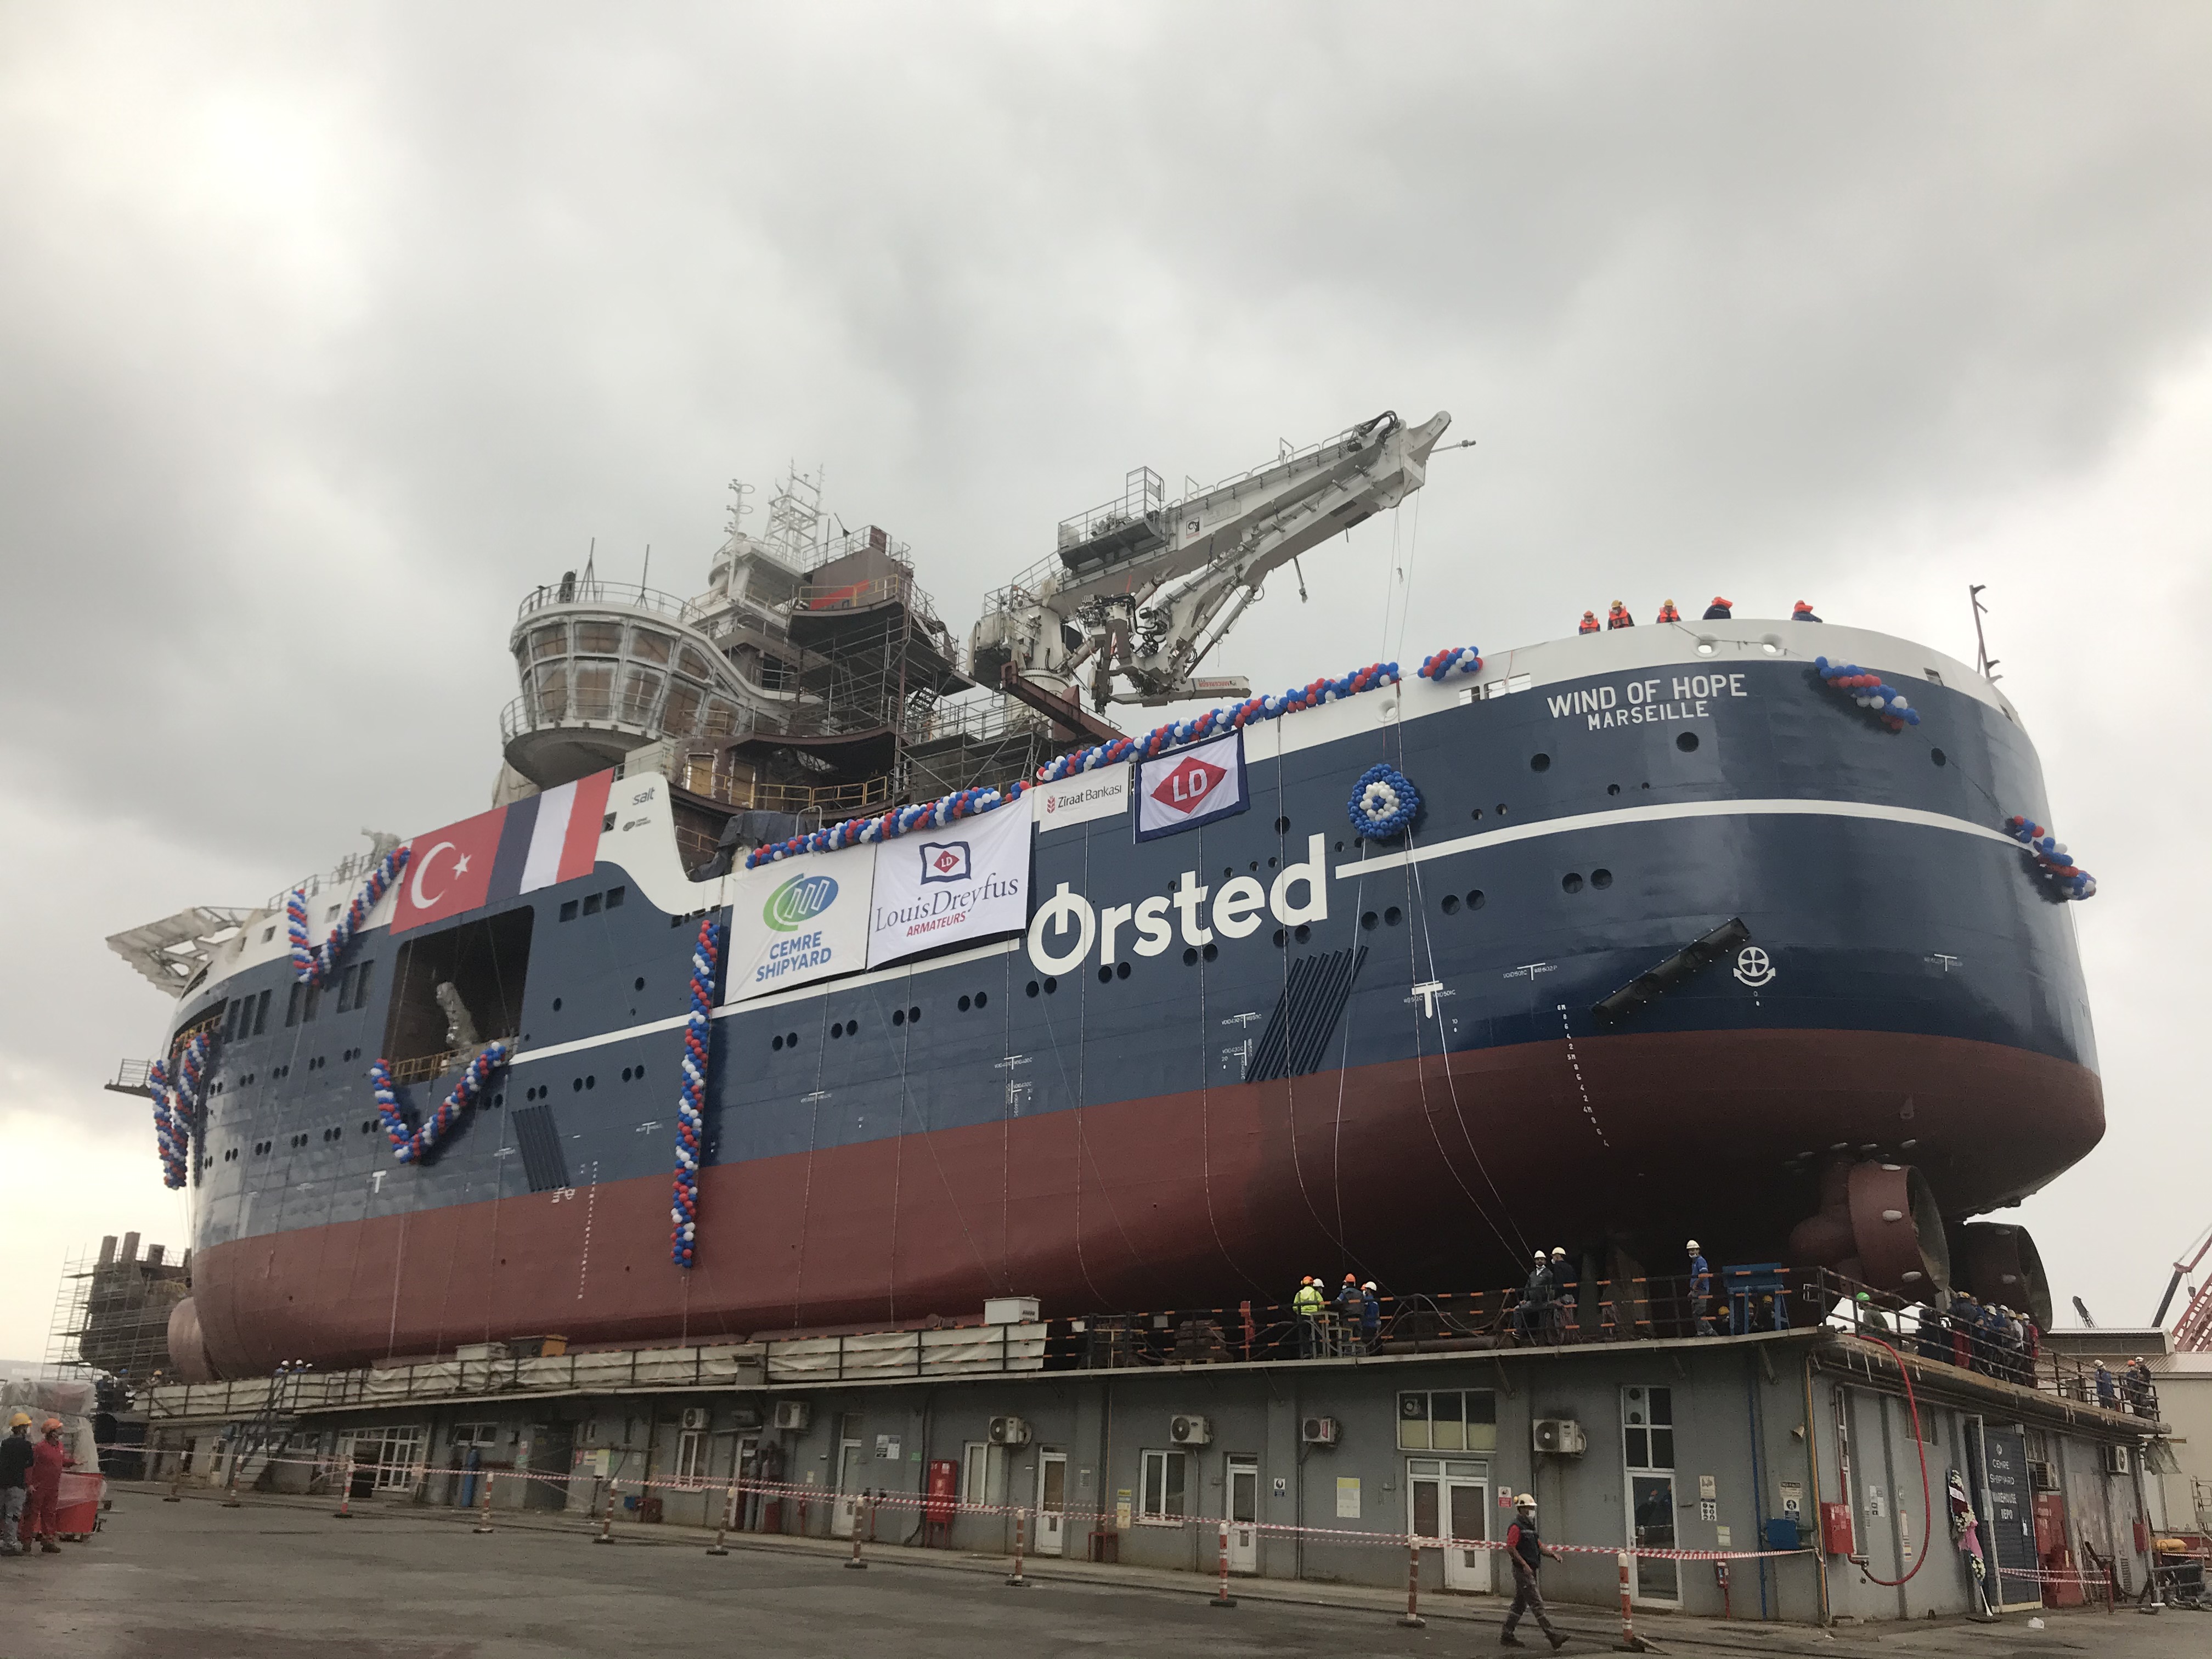 LDA's new service operations vessel launched at Cemre Shipyard in Turkey